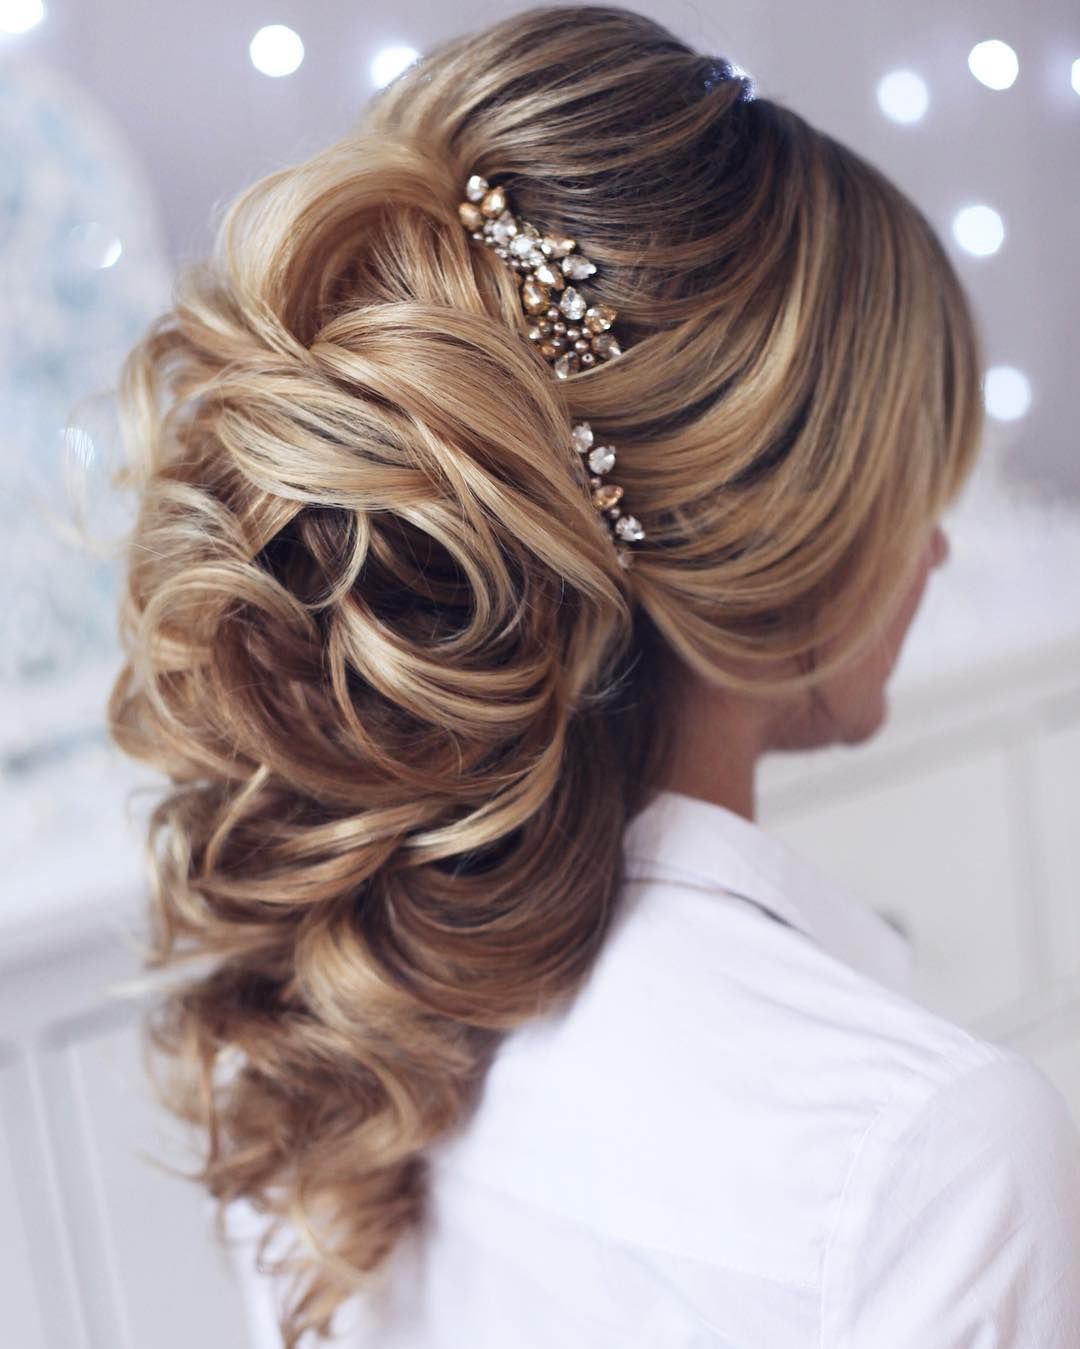 Prom or Wedding Hairstyles for 2021-2022